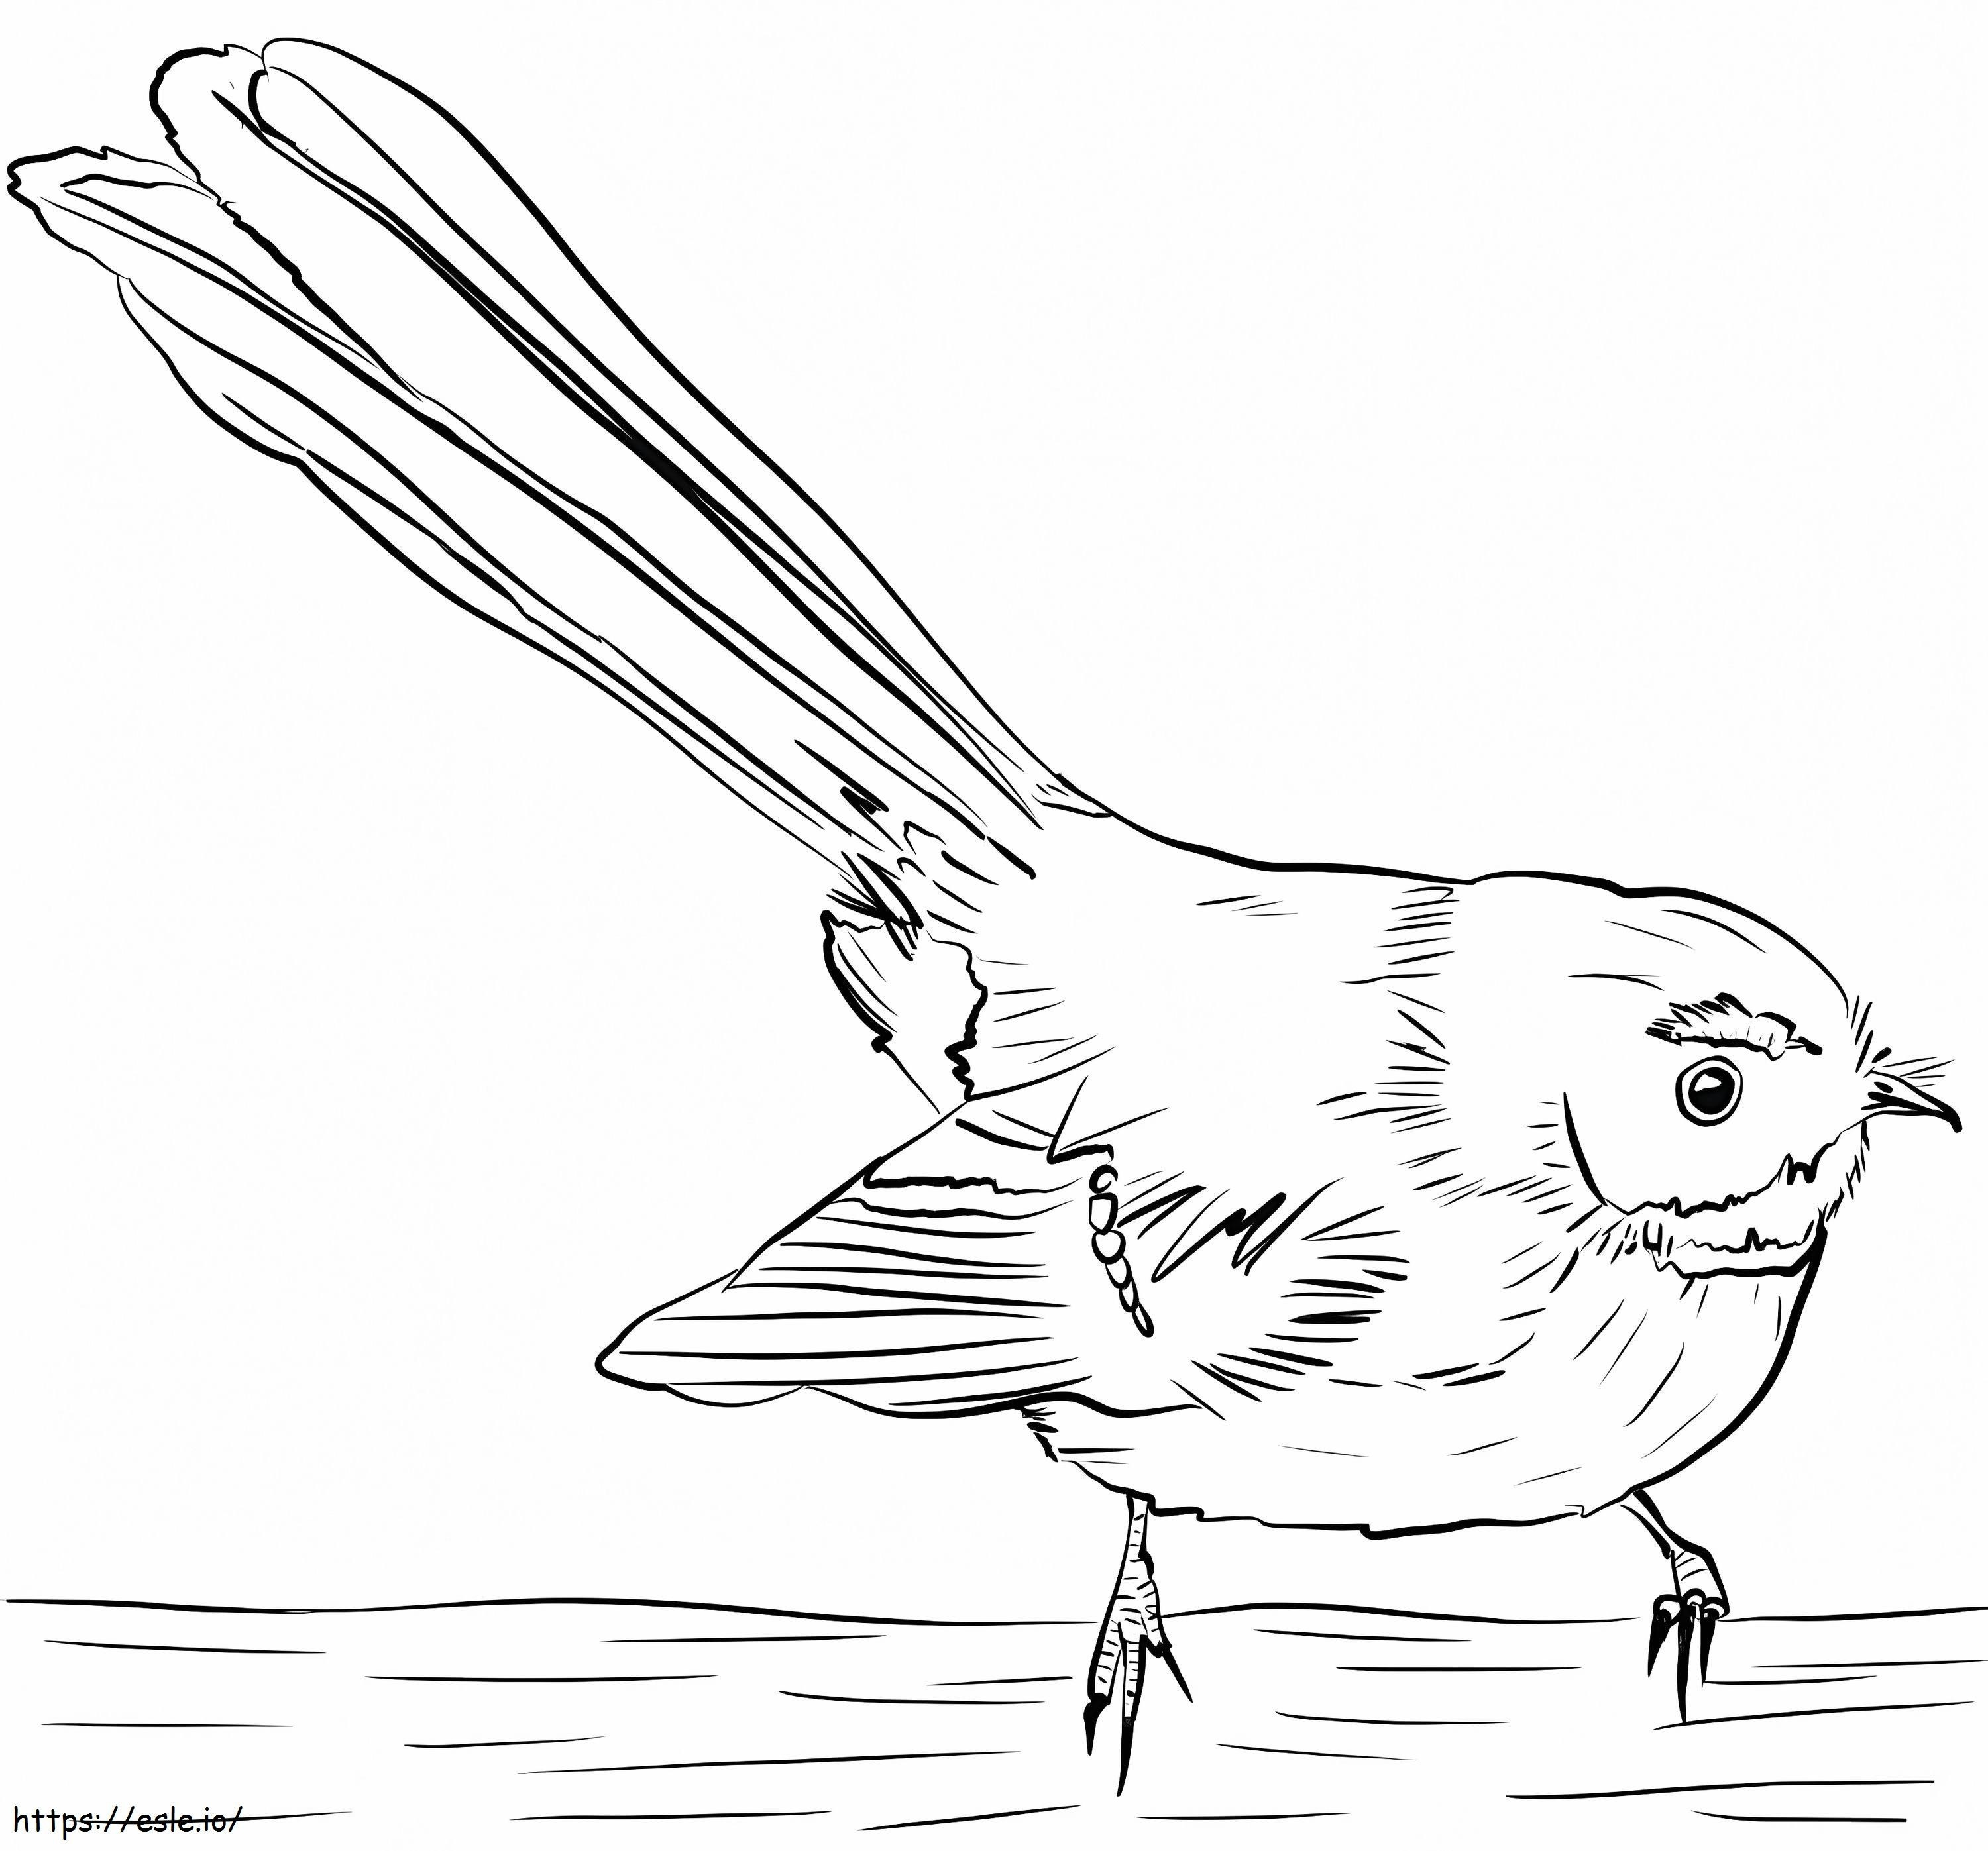 New Zealand Fantail 1 coloring page